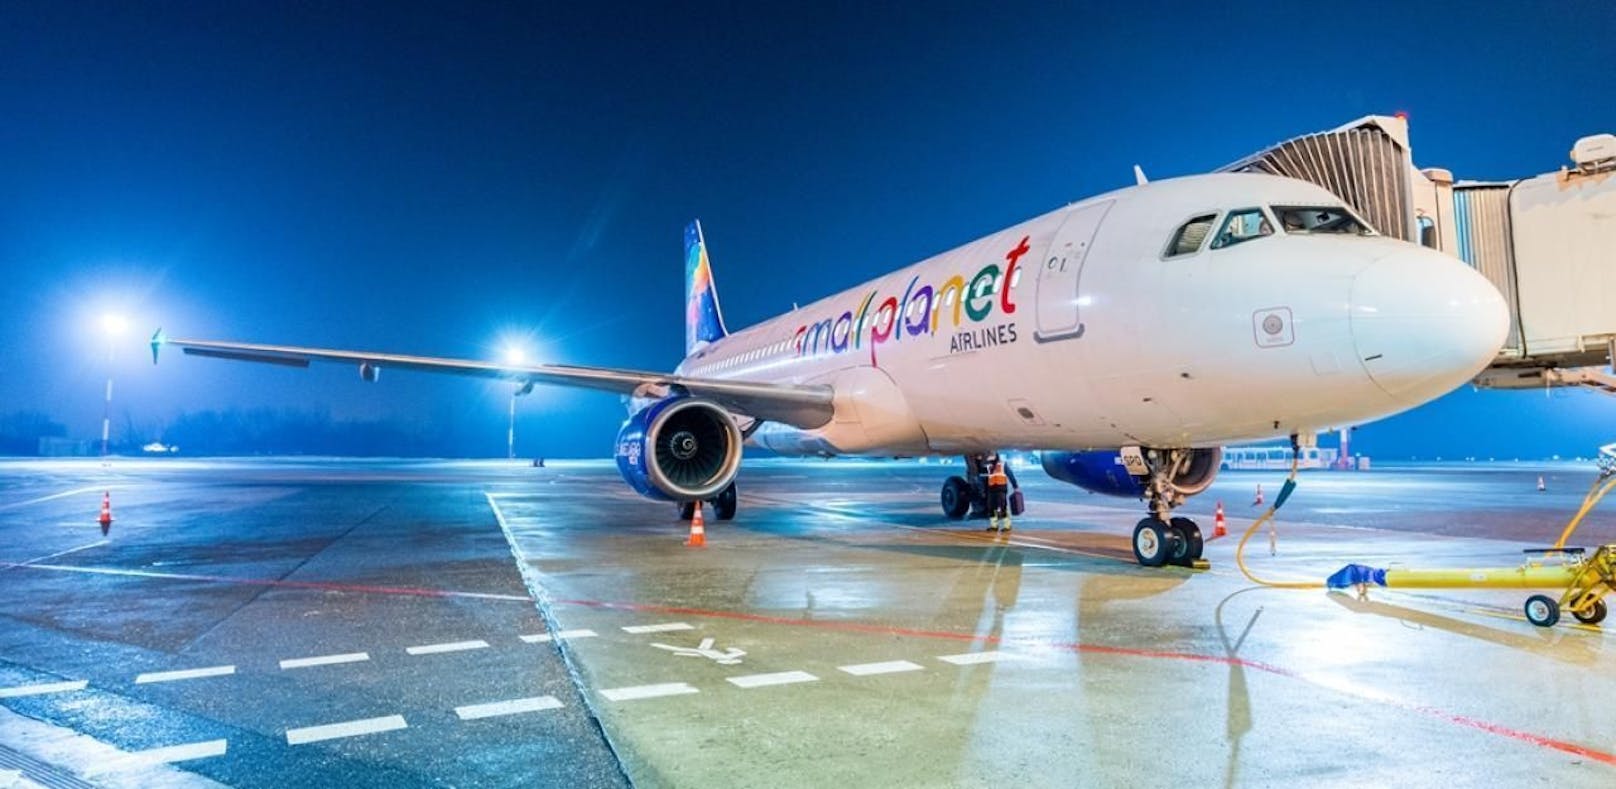 Small Planet Airlines Airbus A320 LY-SPD am Flughafen Vilnius.